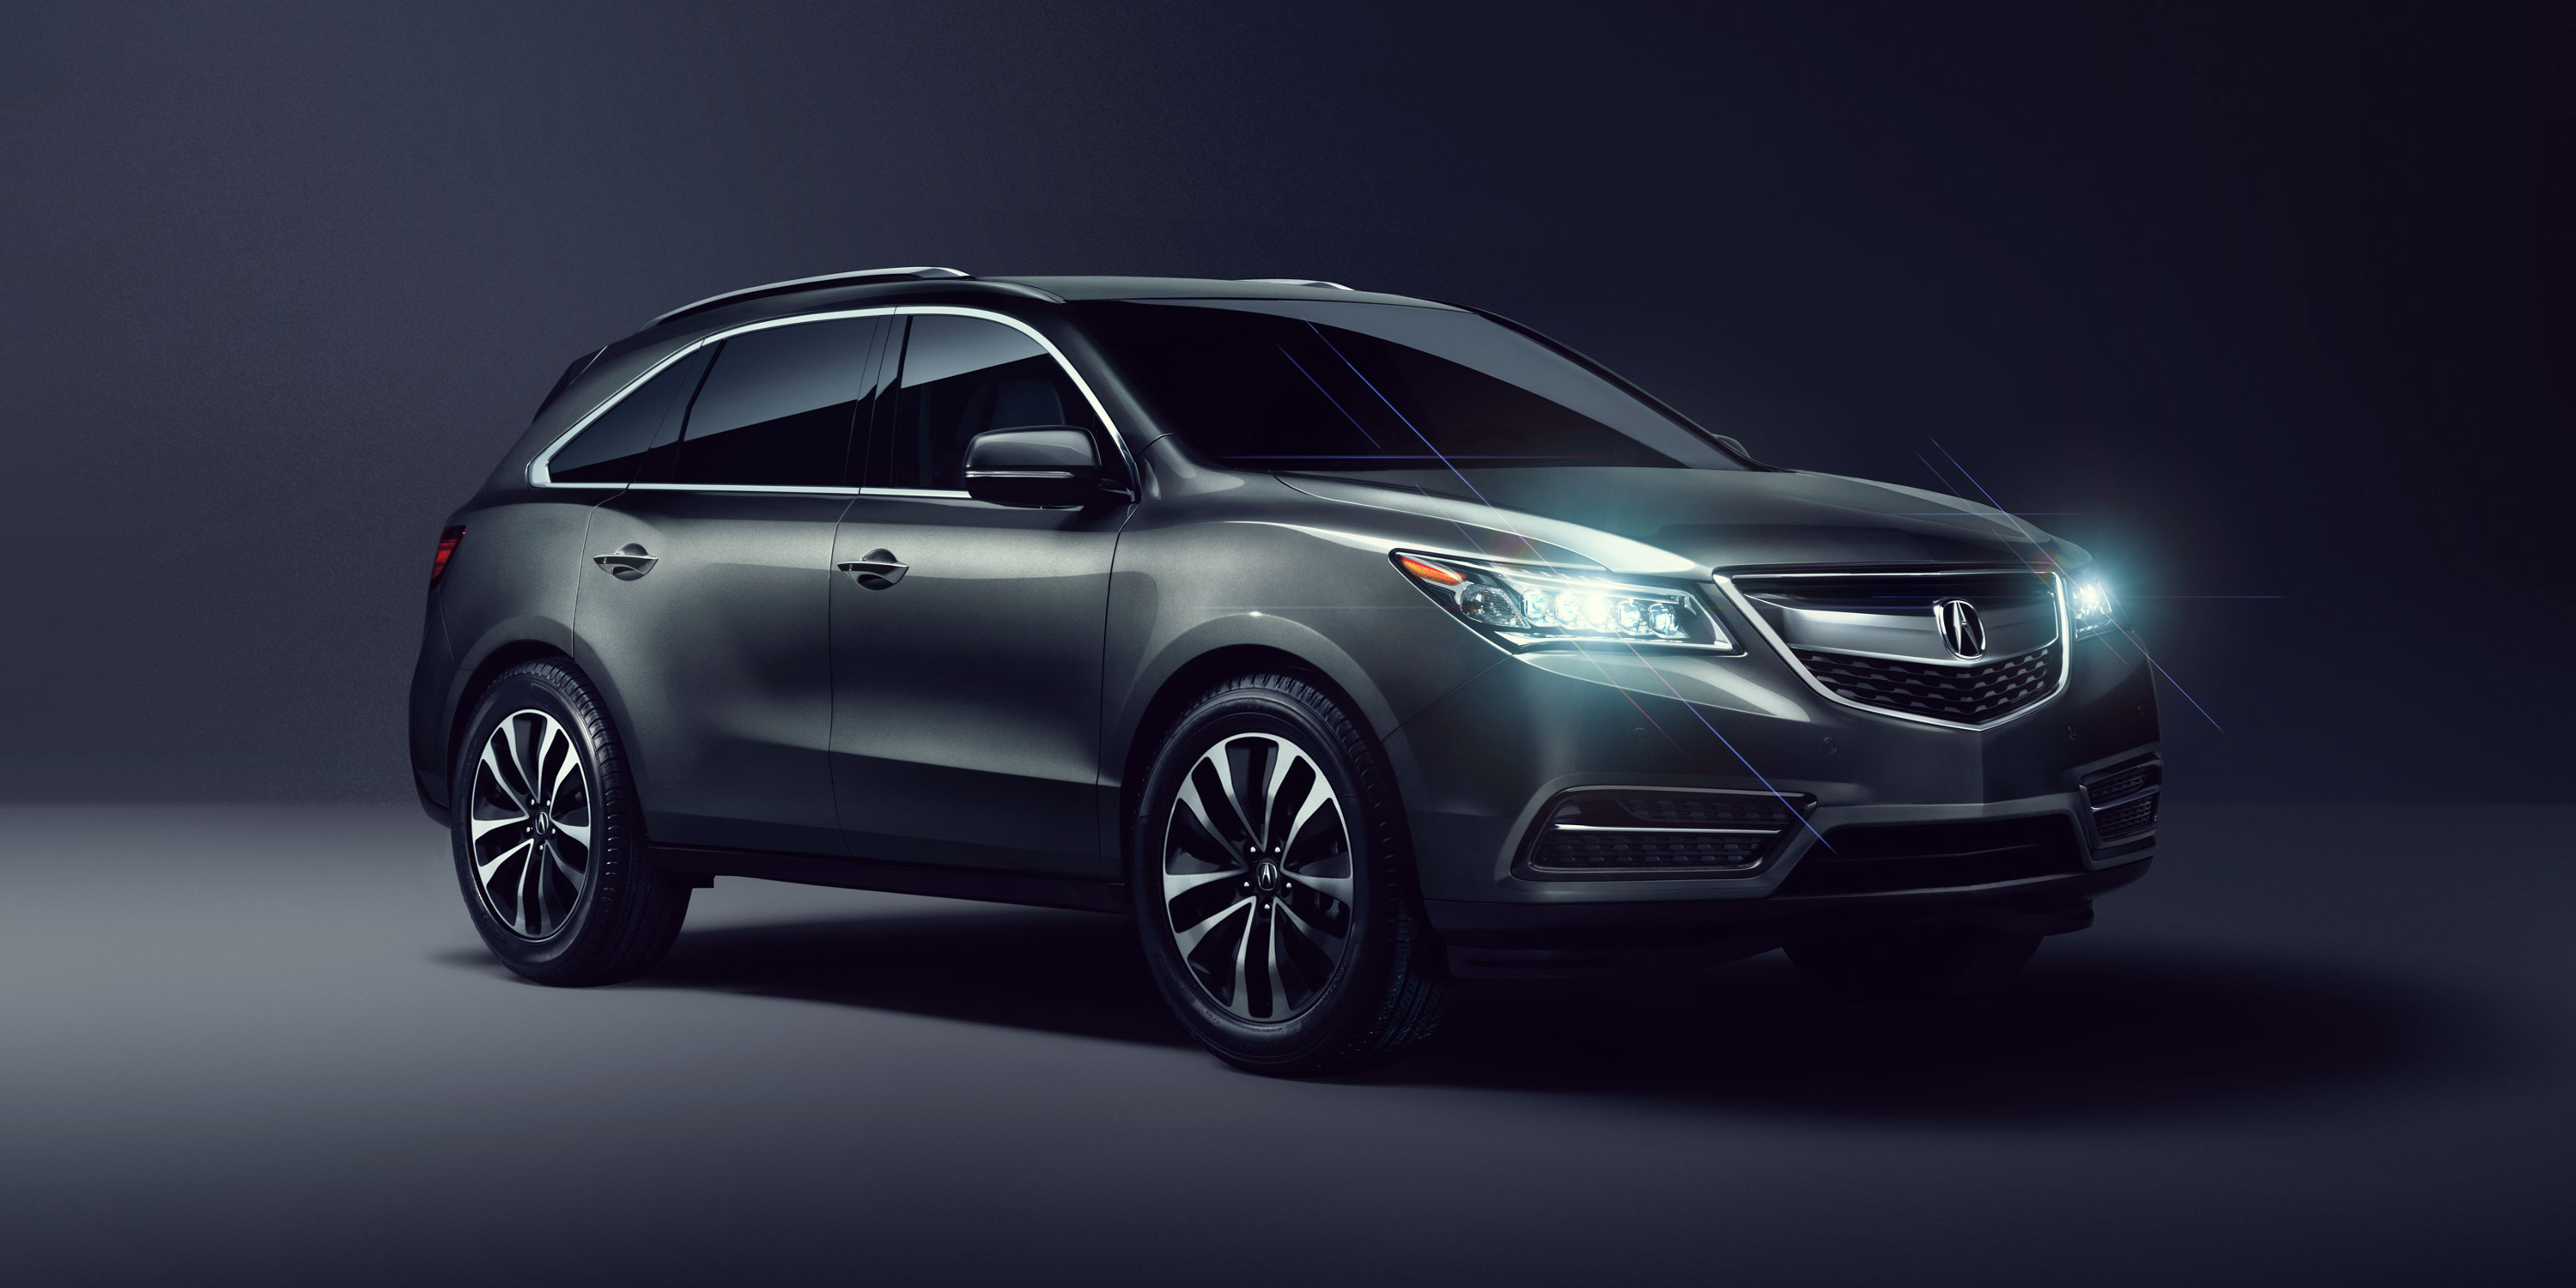 acura mdx Wallpapers hd A1